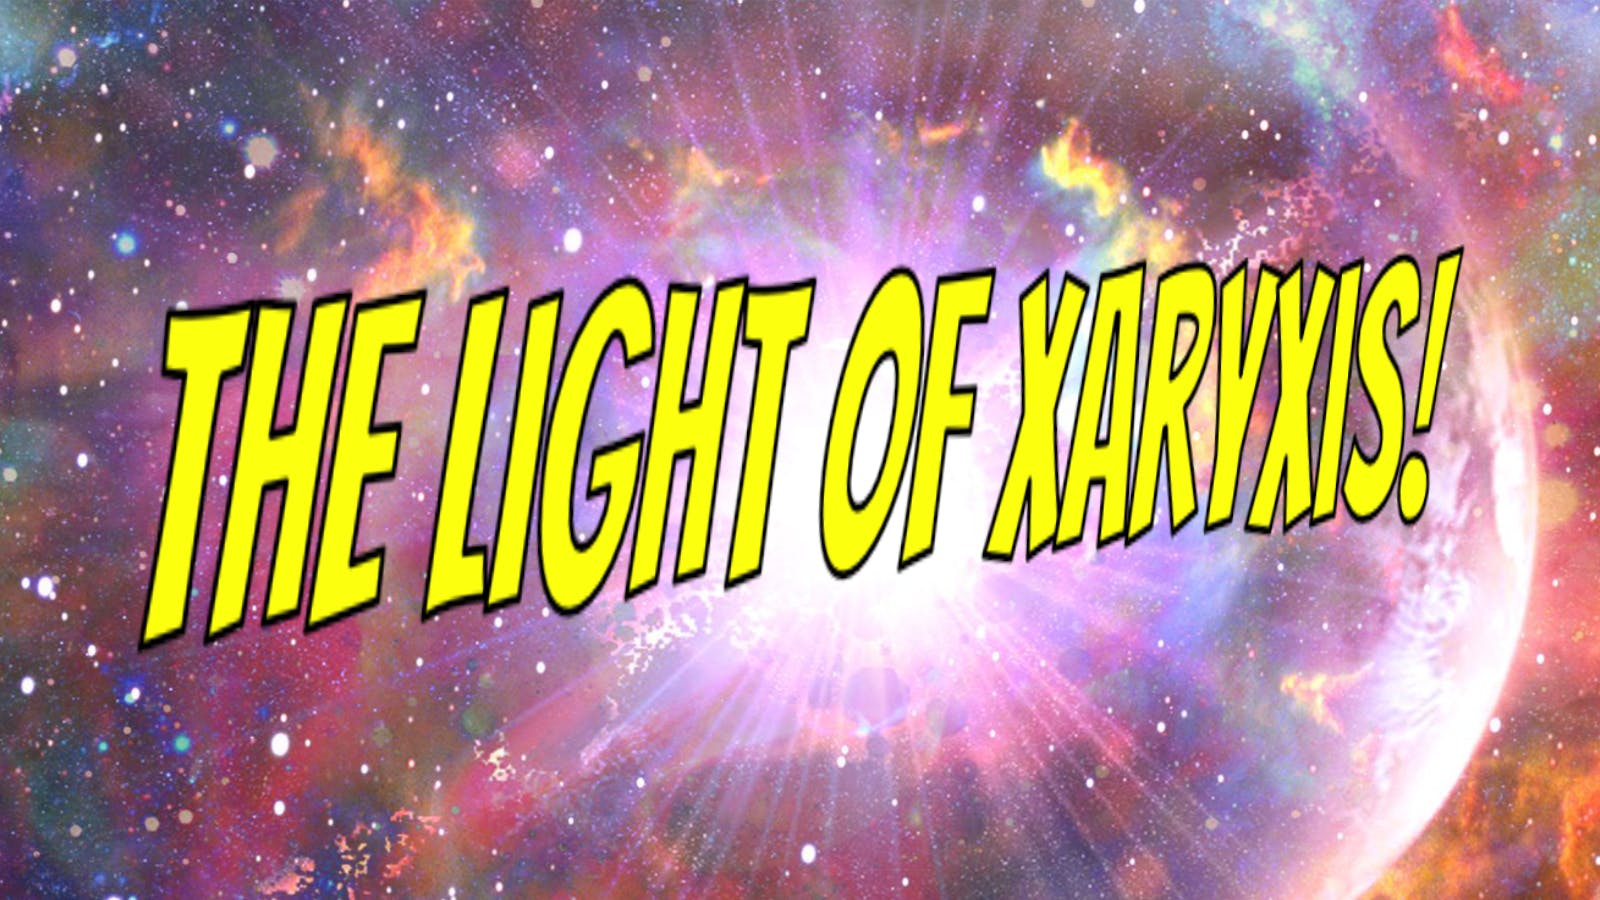 The Hungry Star | Light of Xaryxis | Space Fantasy Pulp! | 🏳️‍🌈 friendly